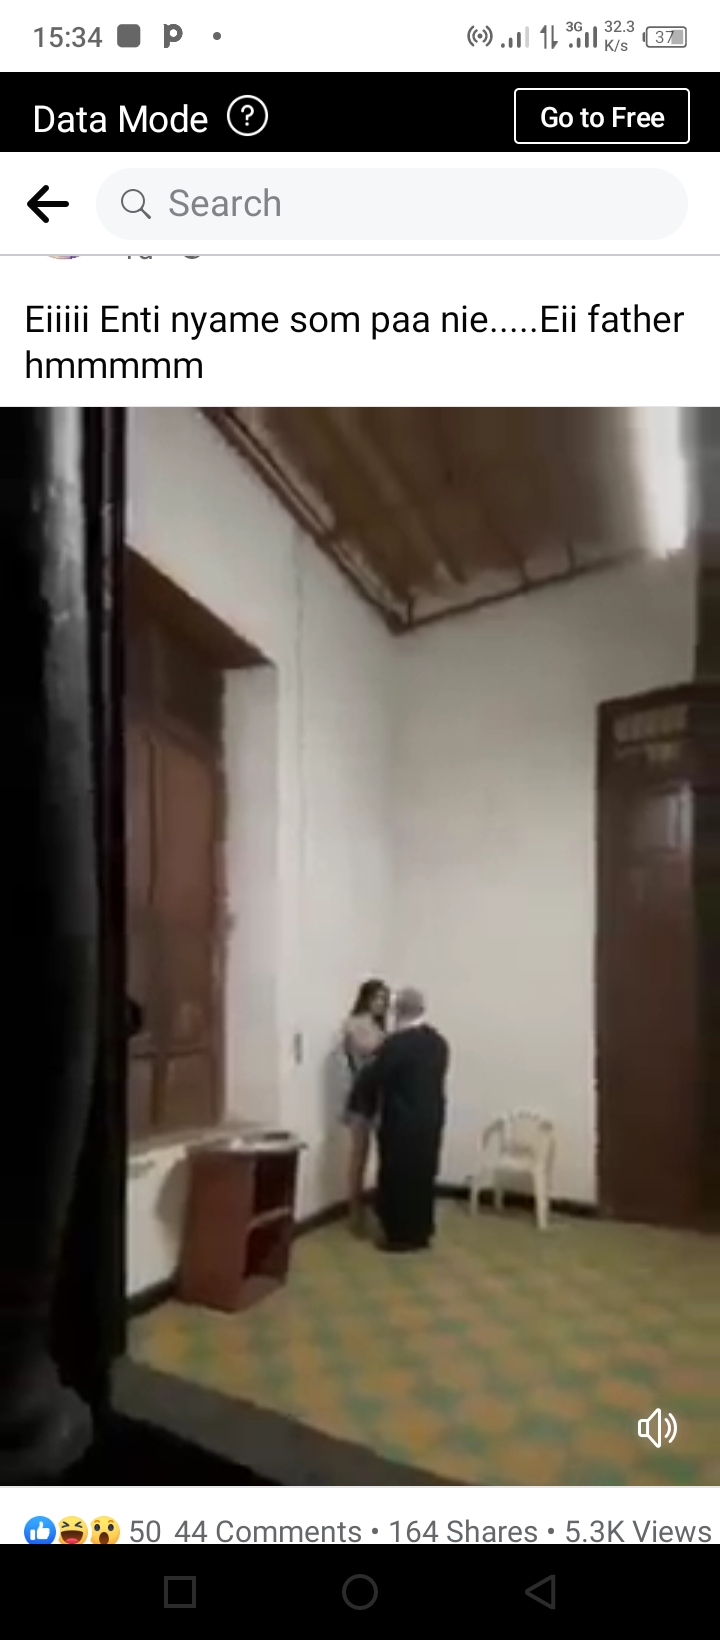 fde5edd8a4024adebf1a904470c7fbf4?quality=uhq&resize=720 Massive Reactions As Secret Video of a Pastor Doing a Shocking Thing With Lady Leaked